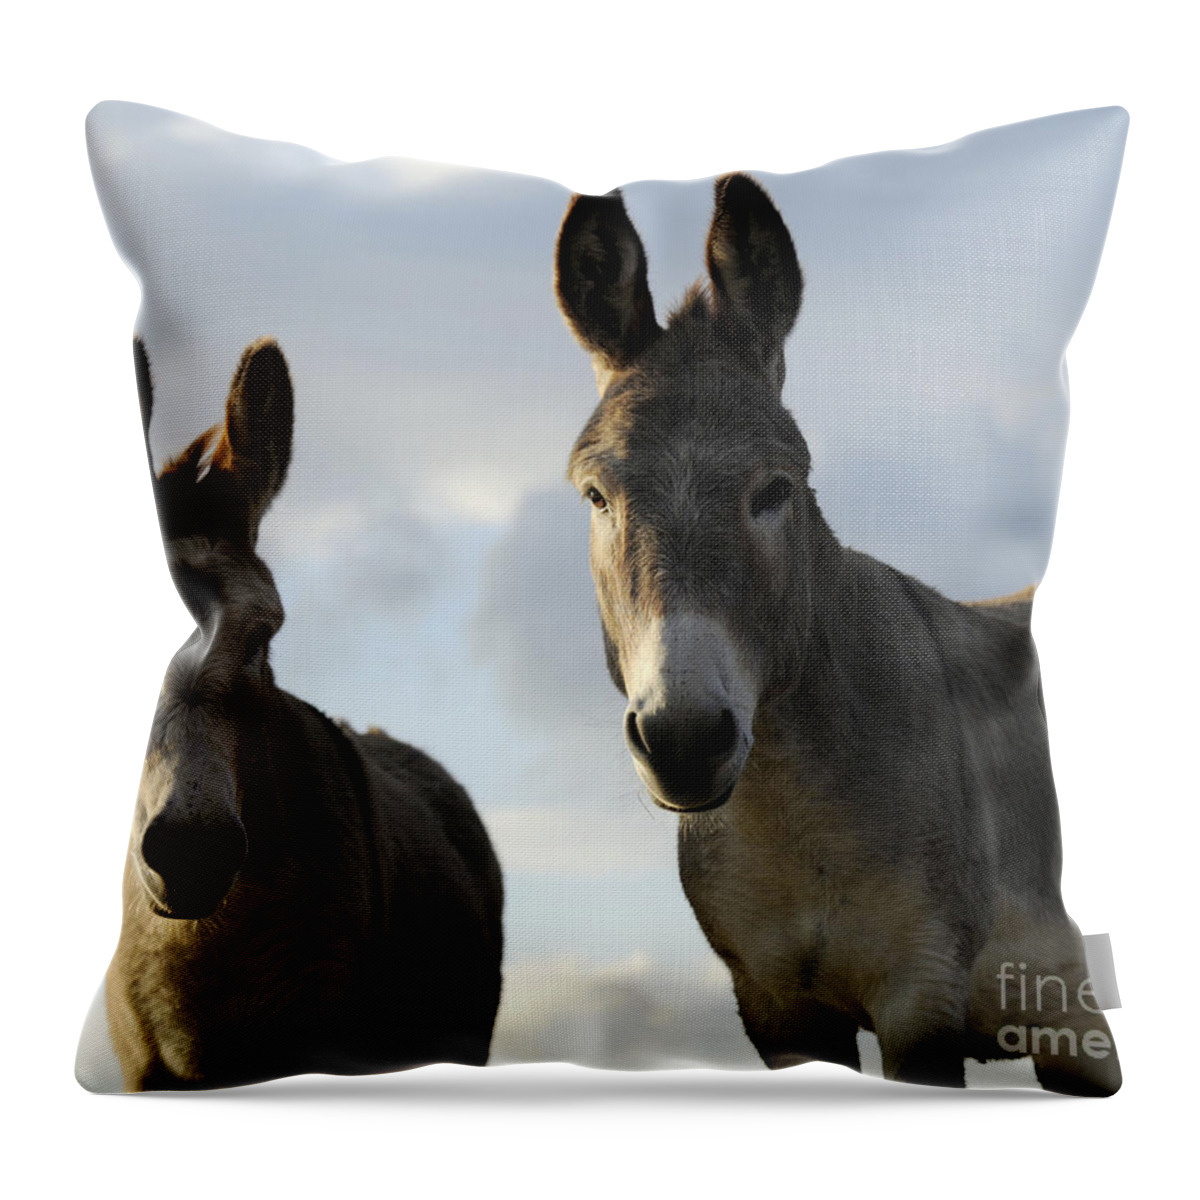 Donkeys Throw Pillow featuring the photograph Donkeys #599 by Carien Schippers